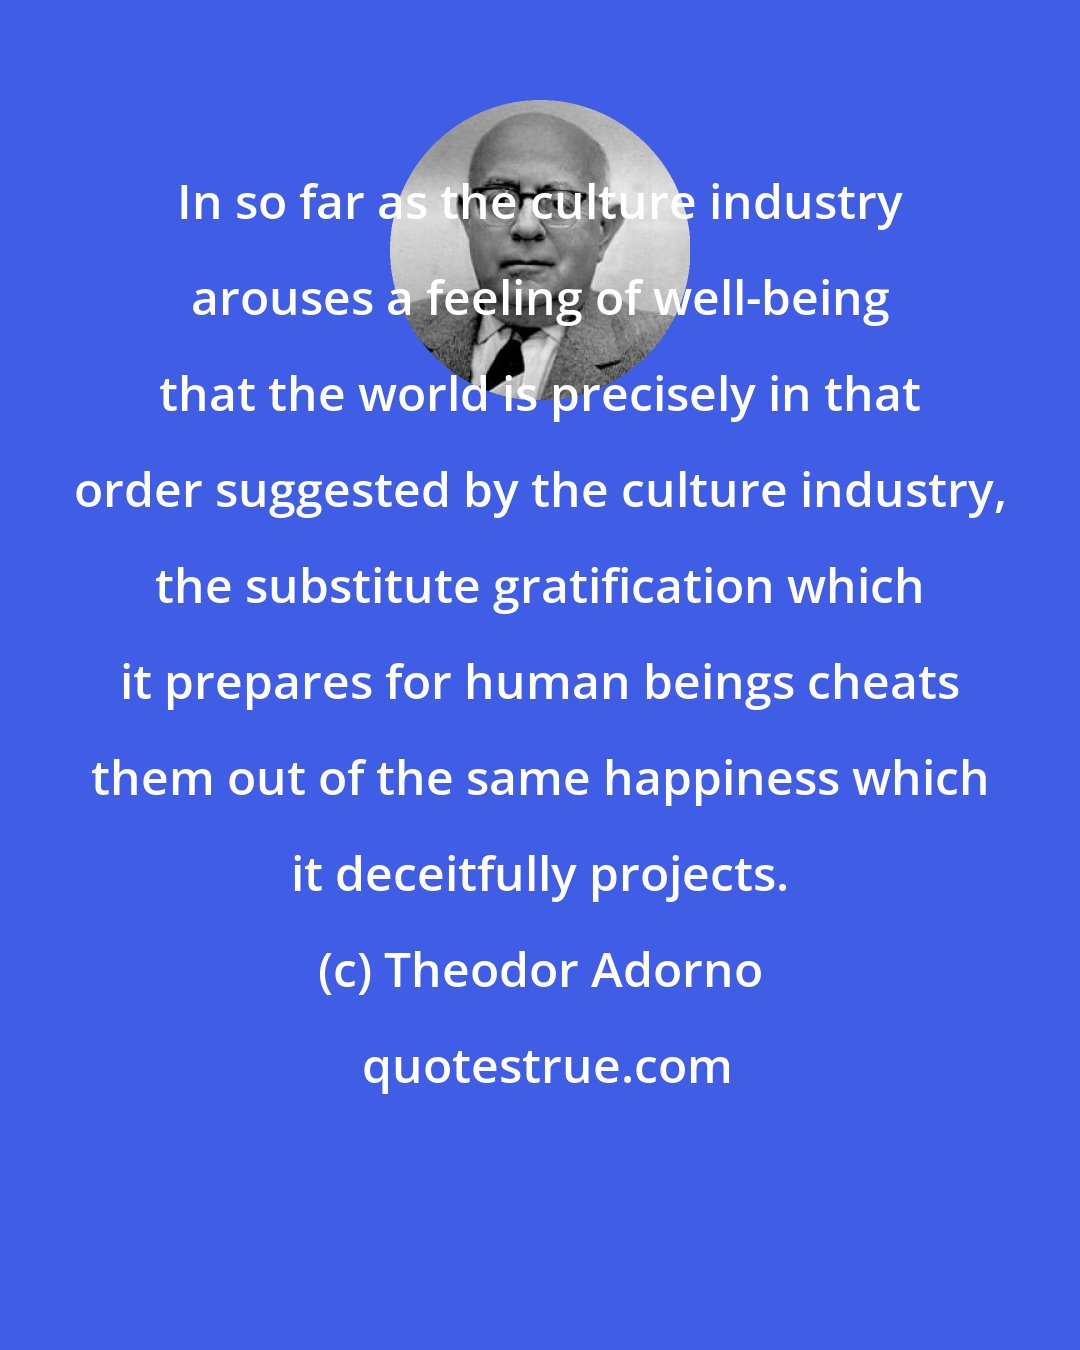 Theodor Adorno: In so far as the culture industry arouses a feeling of well-being that the world is precisely in that order suggested by the culture industry, the substitute gratification which it prepares for human beings cheats them out of the same happiness which it deceitfully projects.